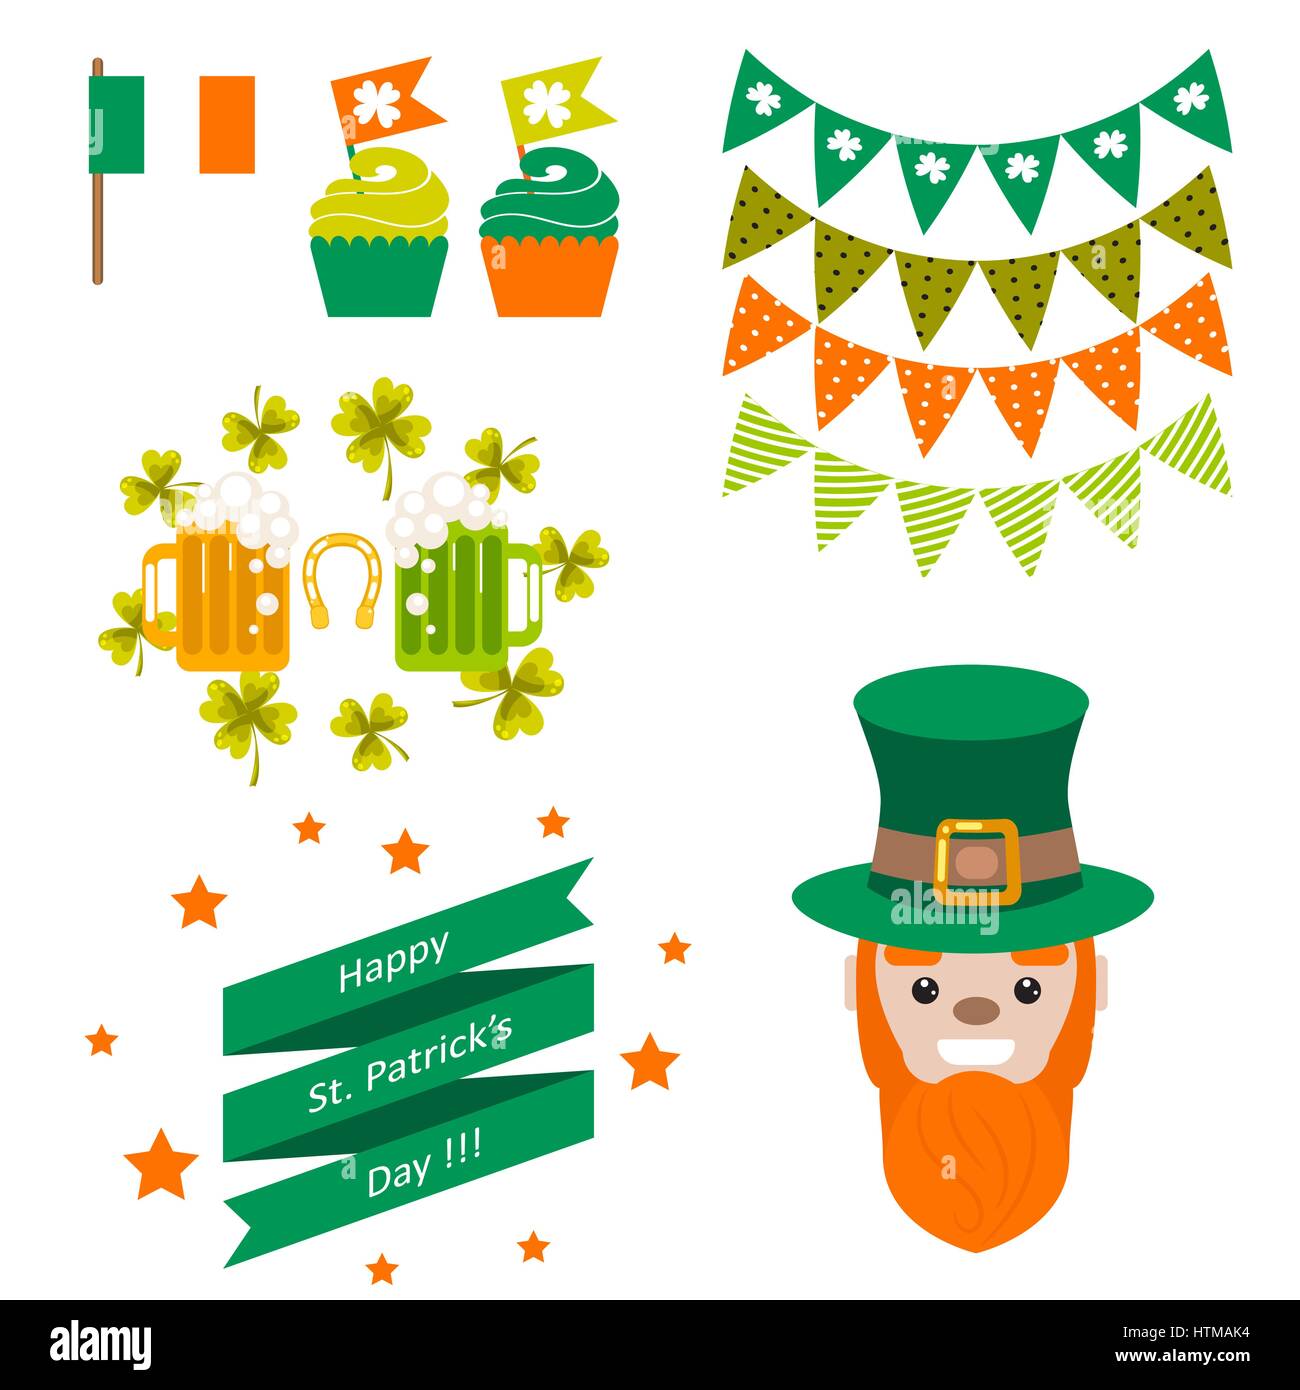 Saint Patricks day party vector objects. Stock Vector